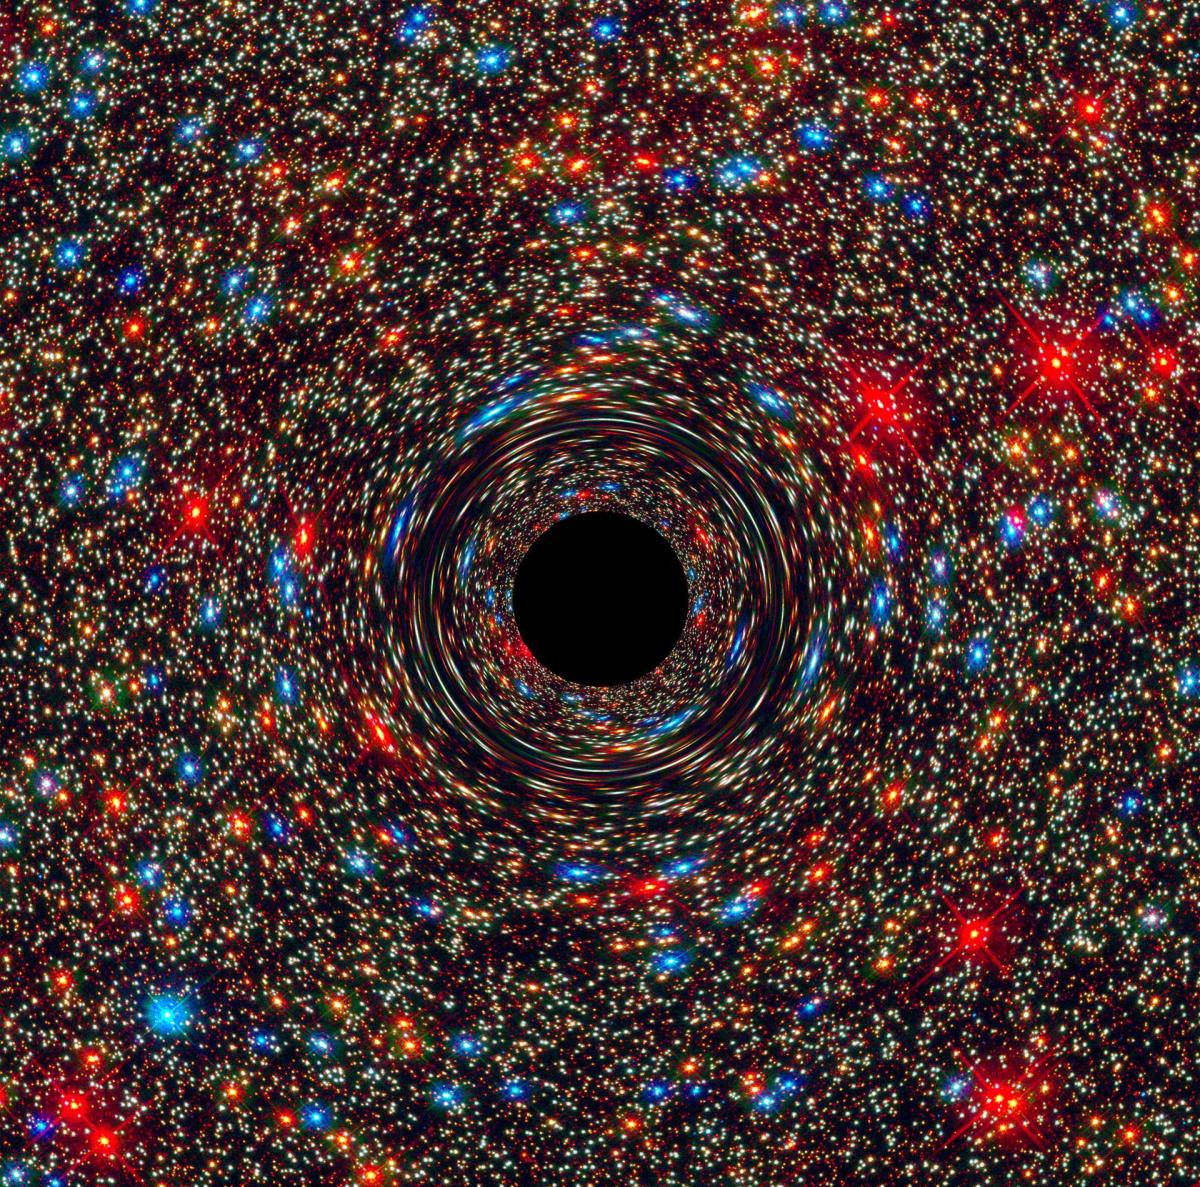 someone getting pulled into a black hole